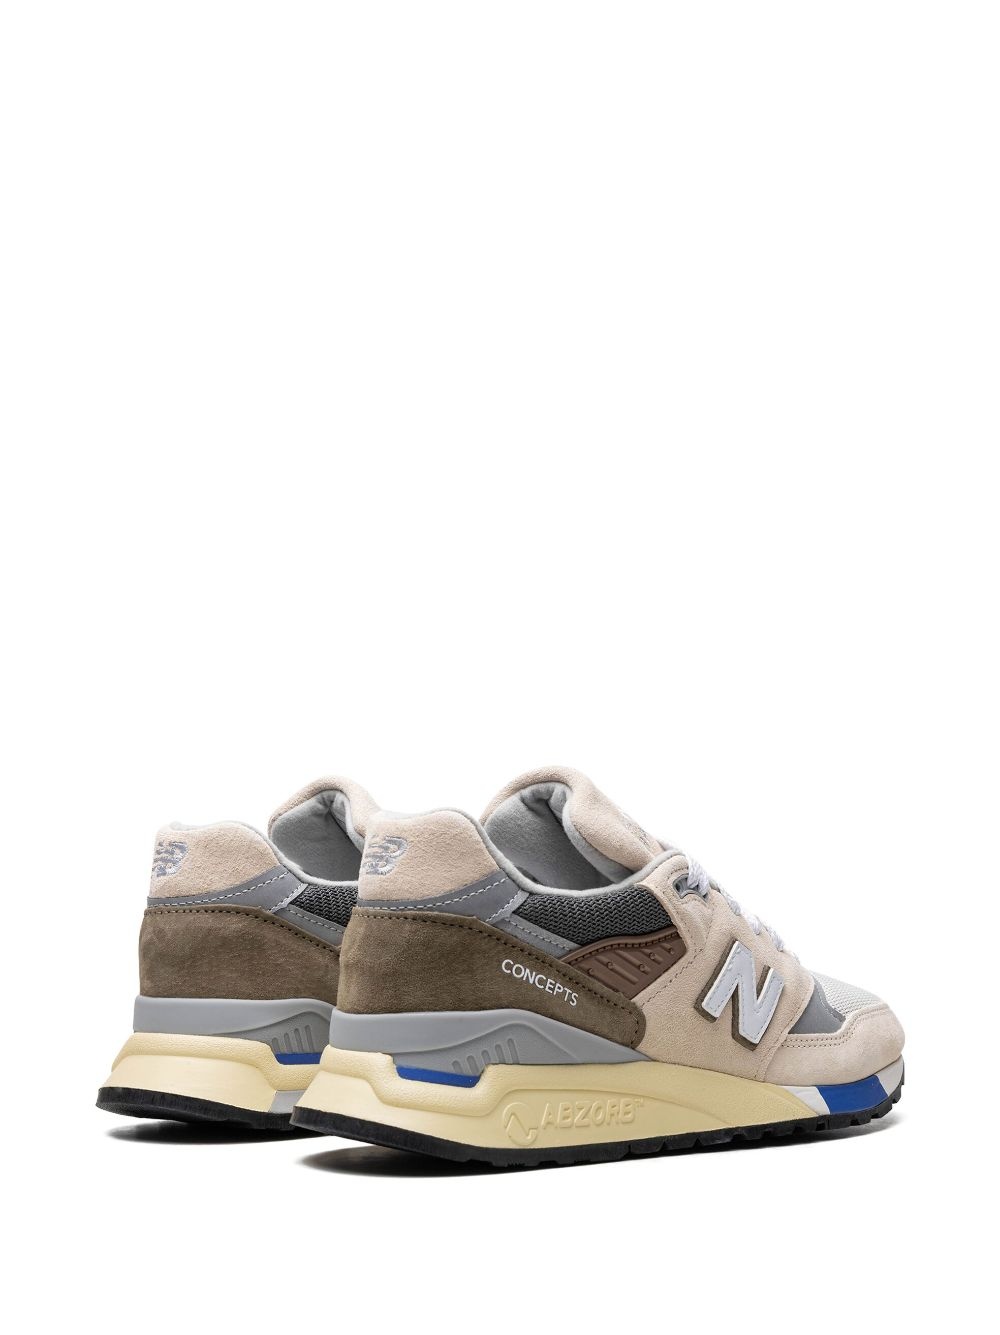 x Concepts 998 "C-Note" sneakers - 3